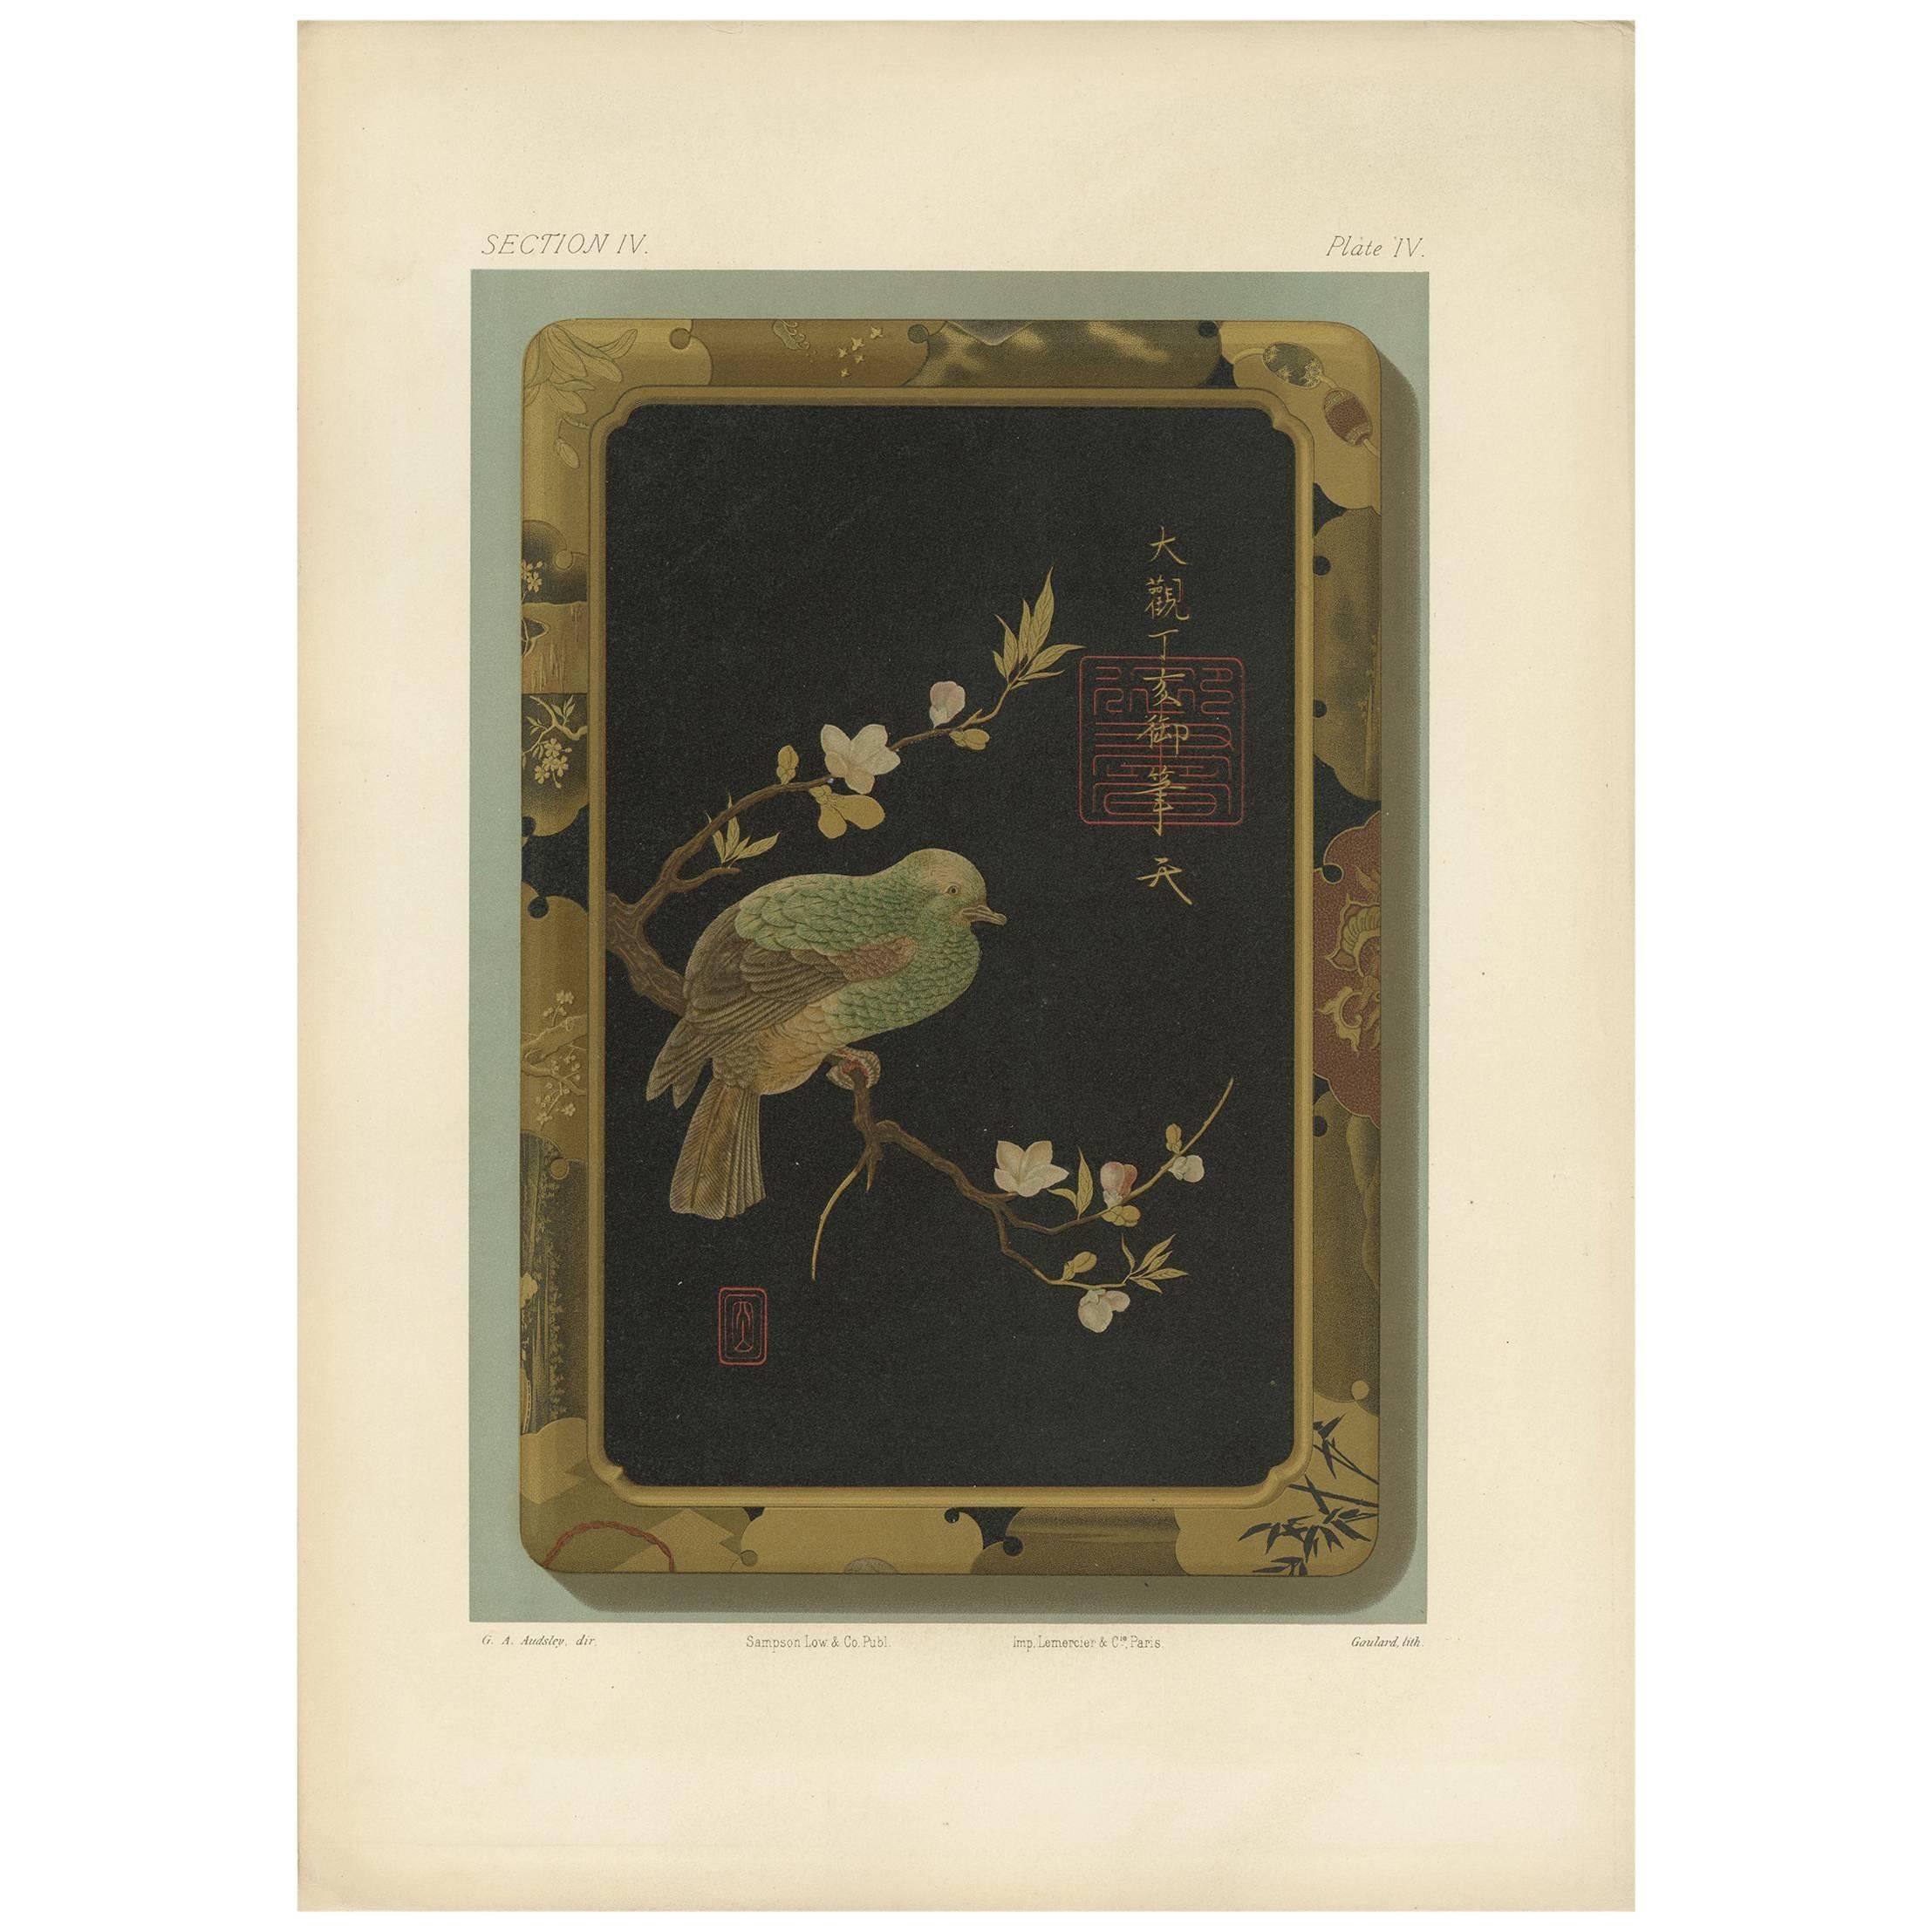 Antique Print of a Japanese Box 'Lacquer' by G. Audsley, 1882